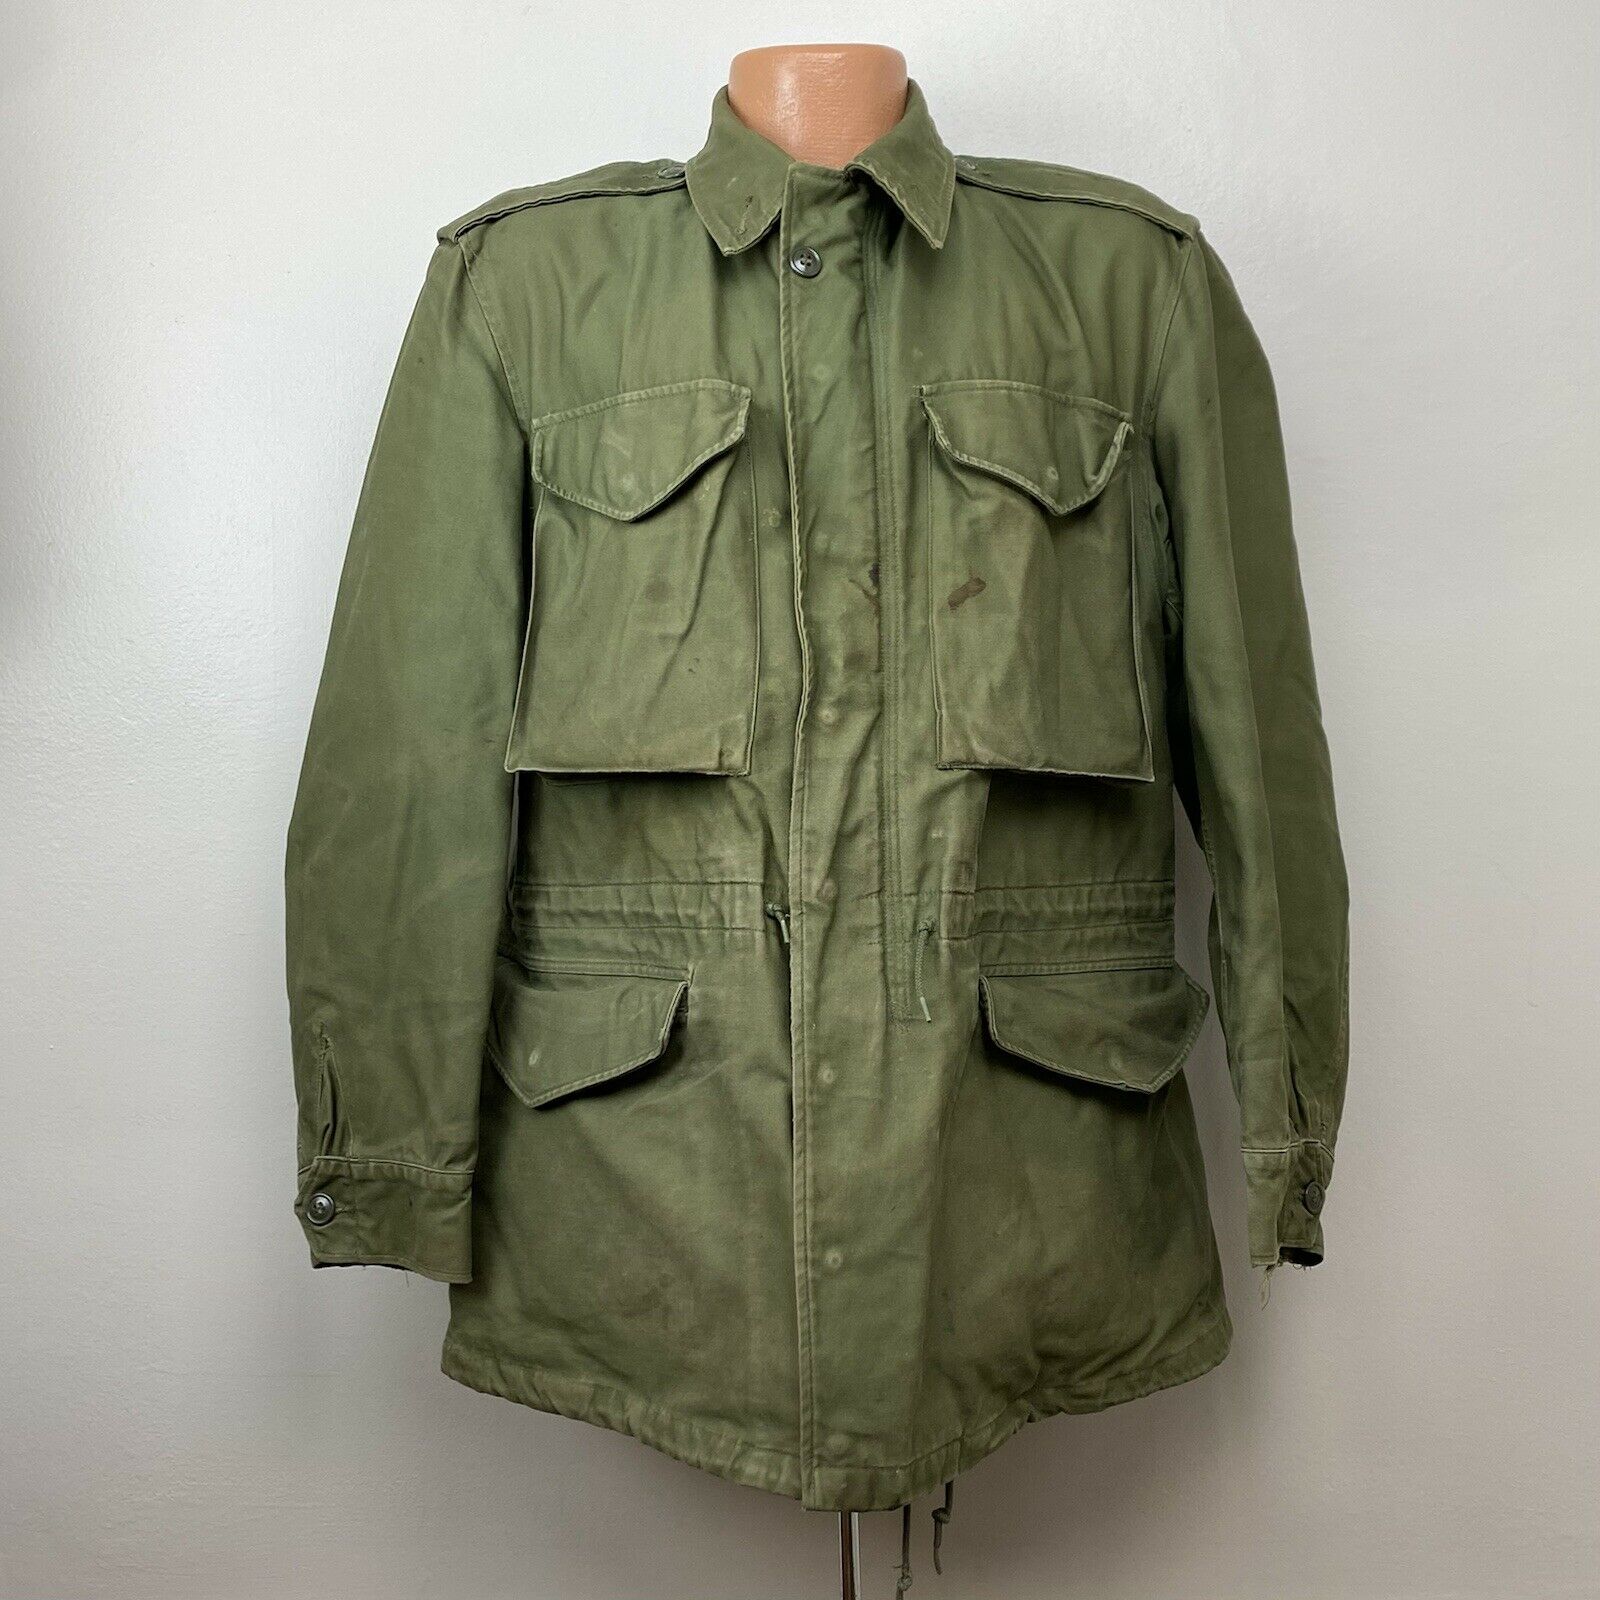 1950s/60s M-1951 OG107 US Military Field Jacket, Size Small